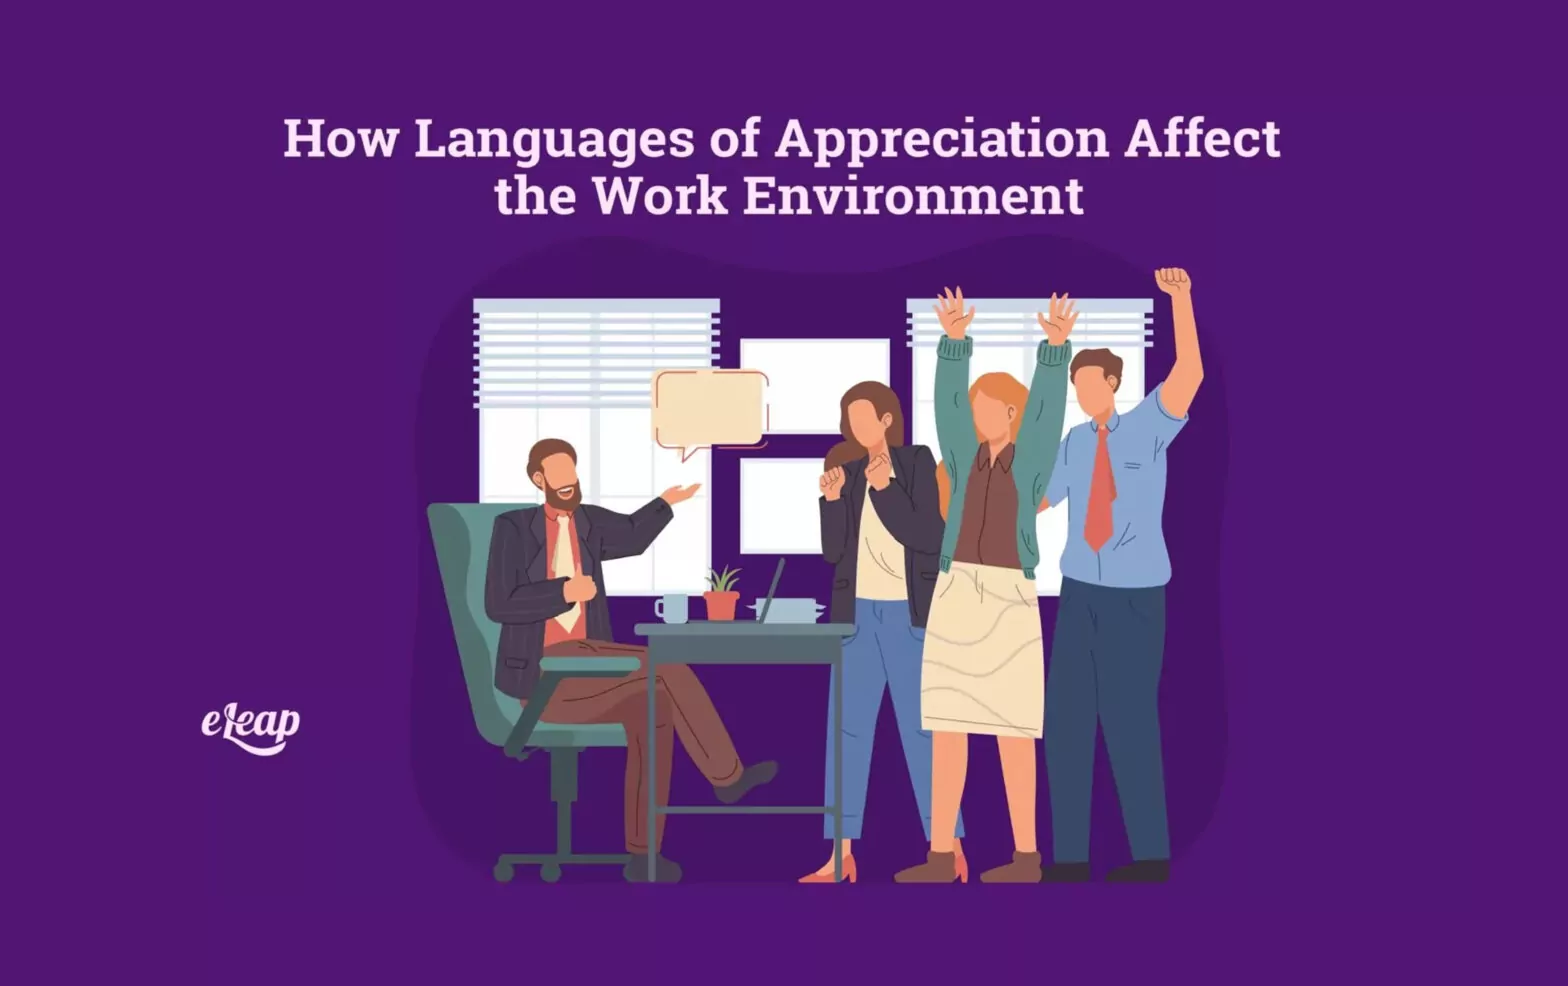 How Languages of Appreciation Affect the Work Environment